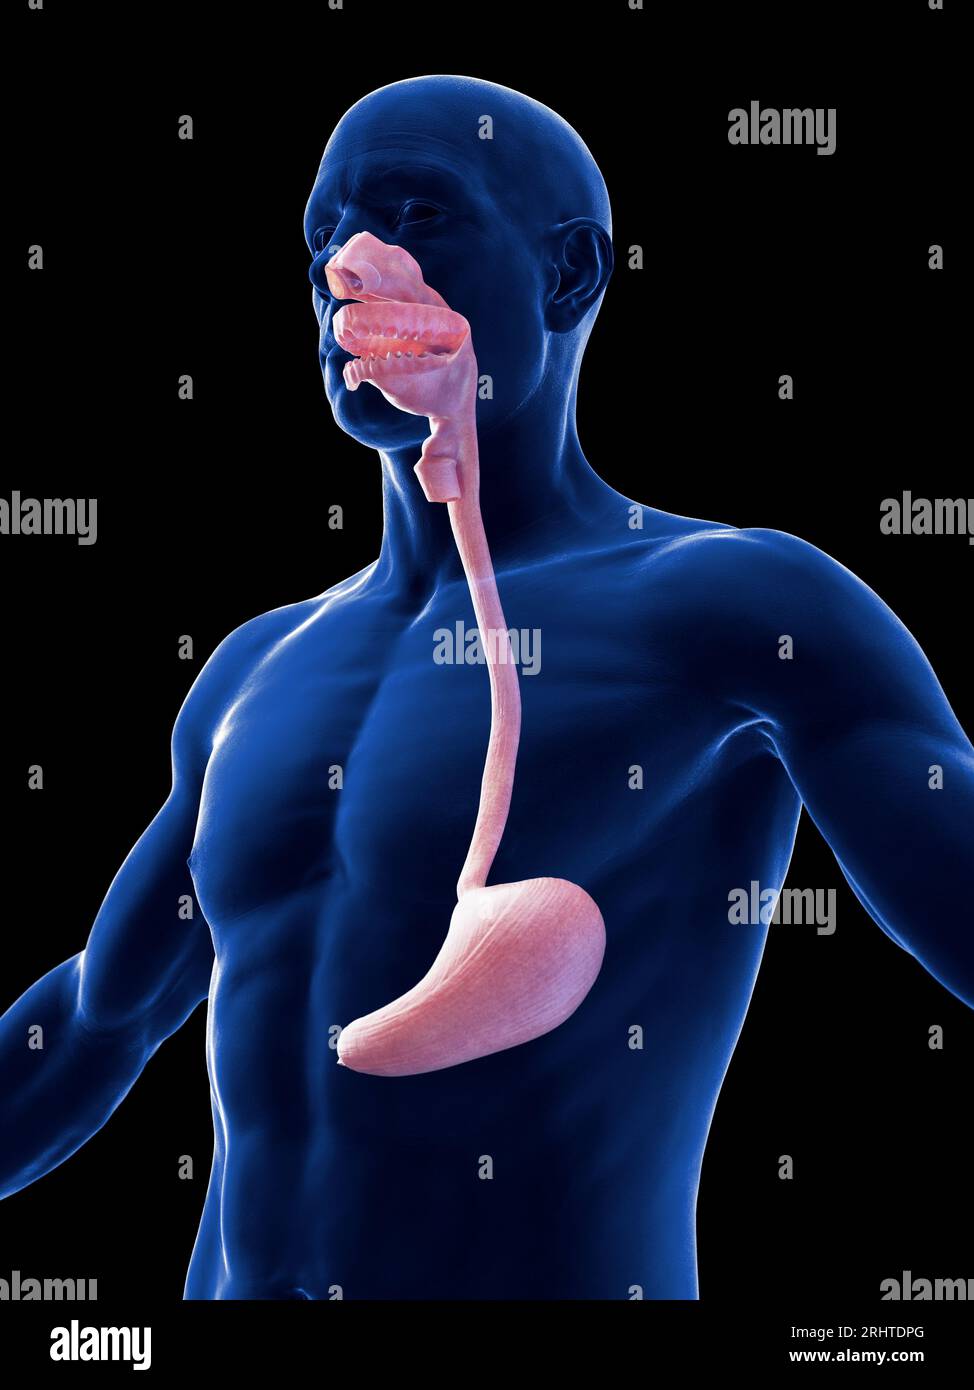 Male stomach and oesophagus, illustration Stock Photo